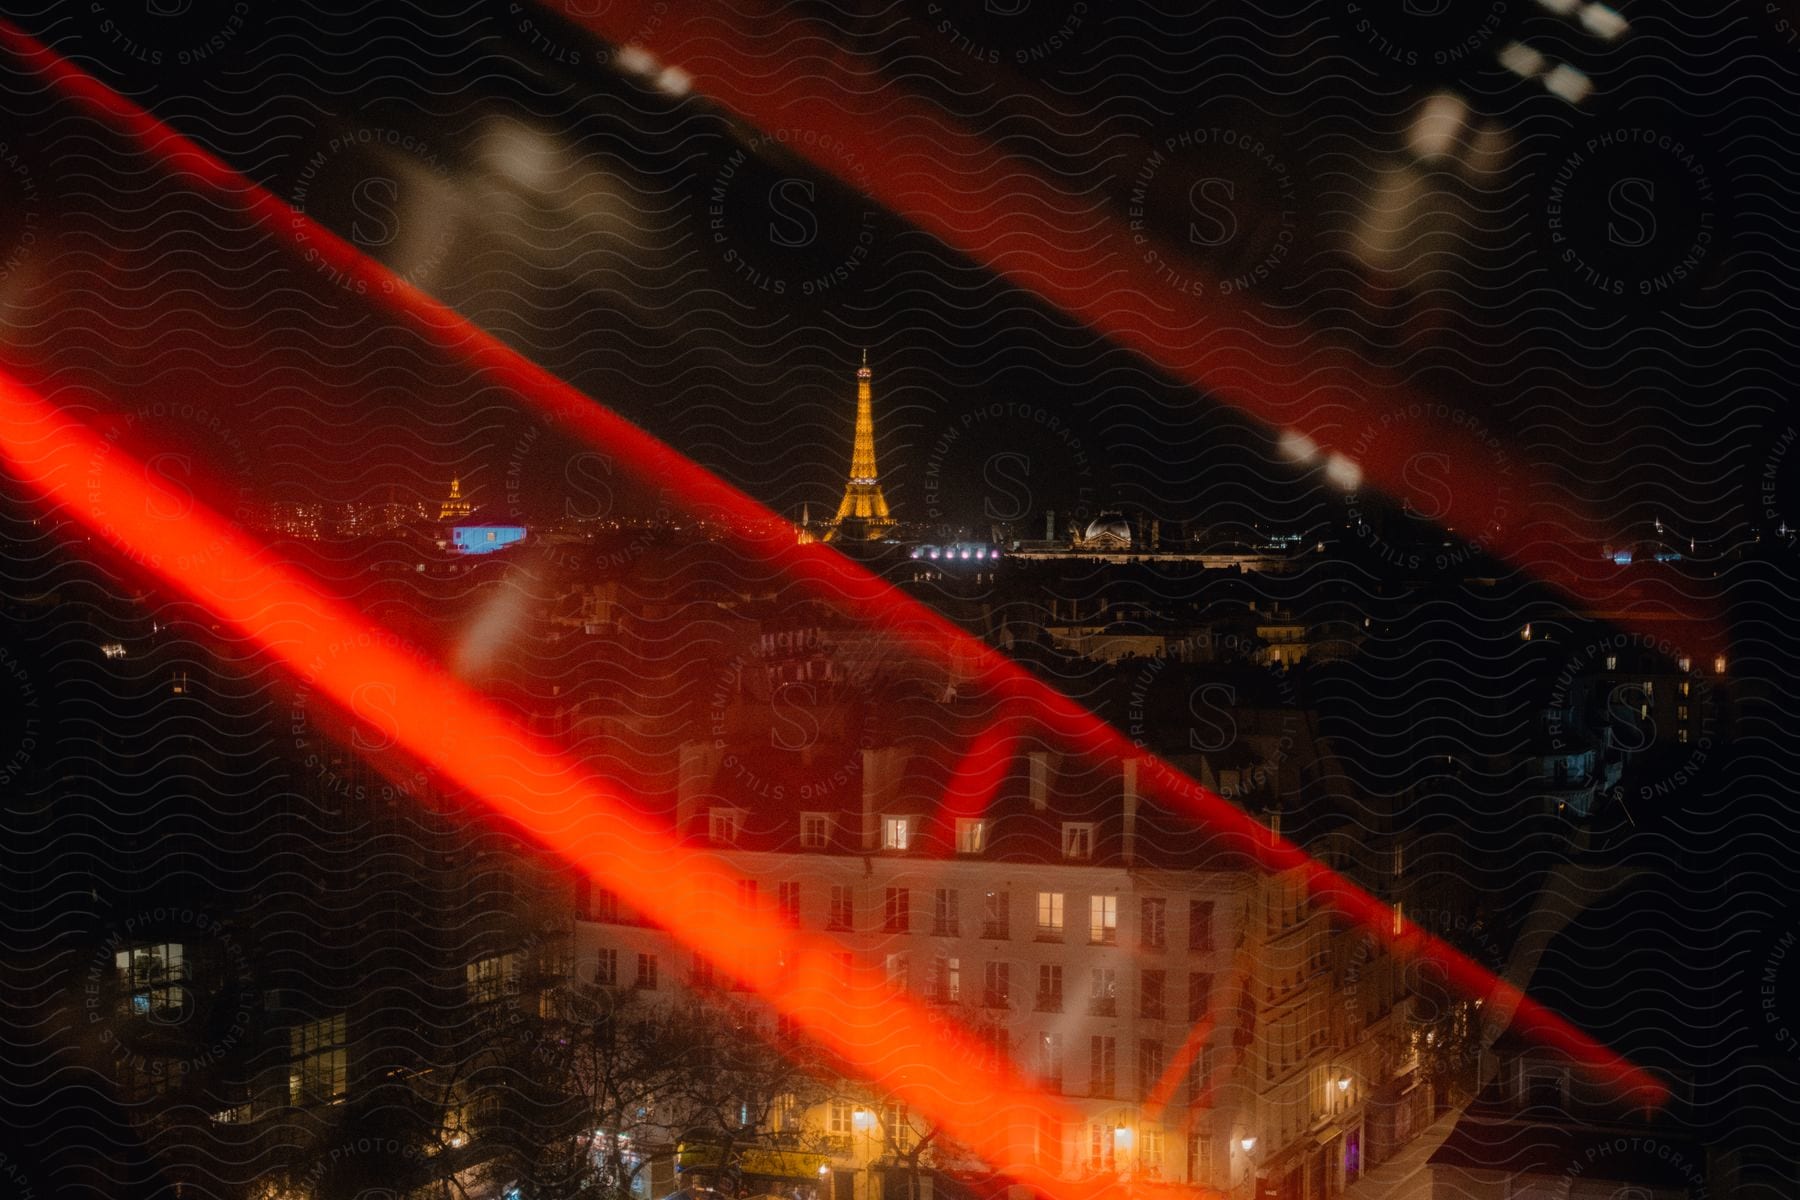 The Eiffel Tower and Paris suburb with a reflective slightly blurry overlay